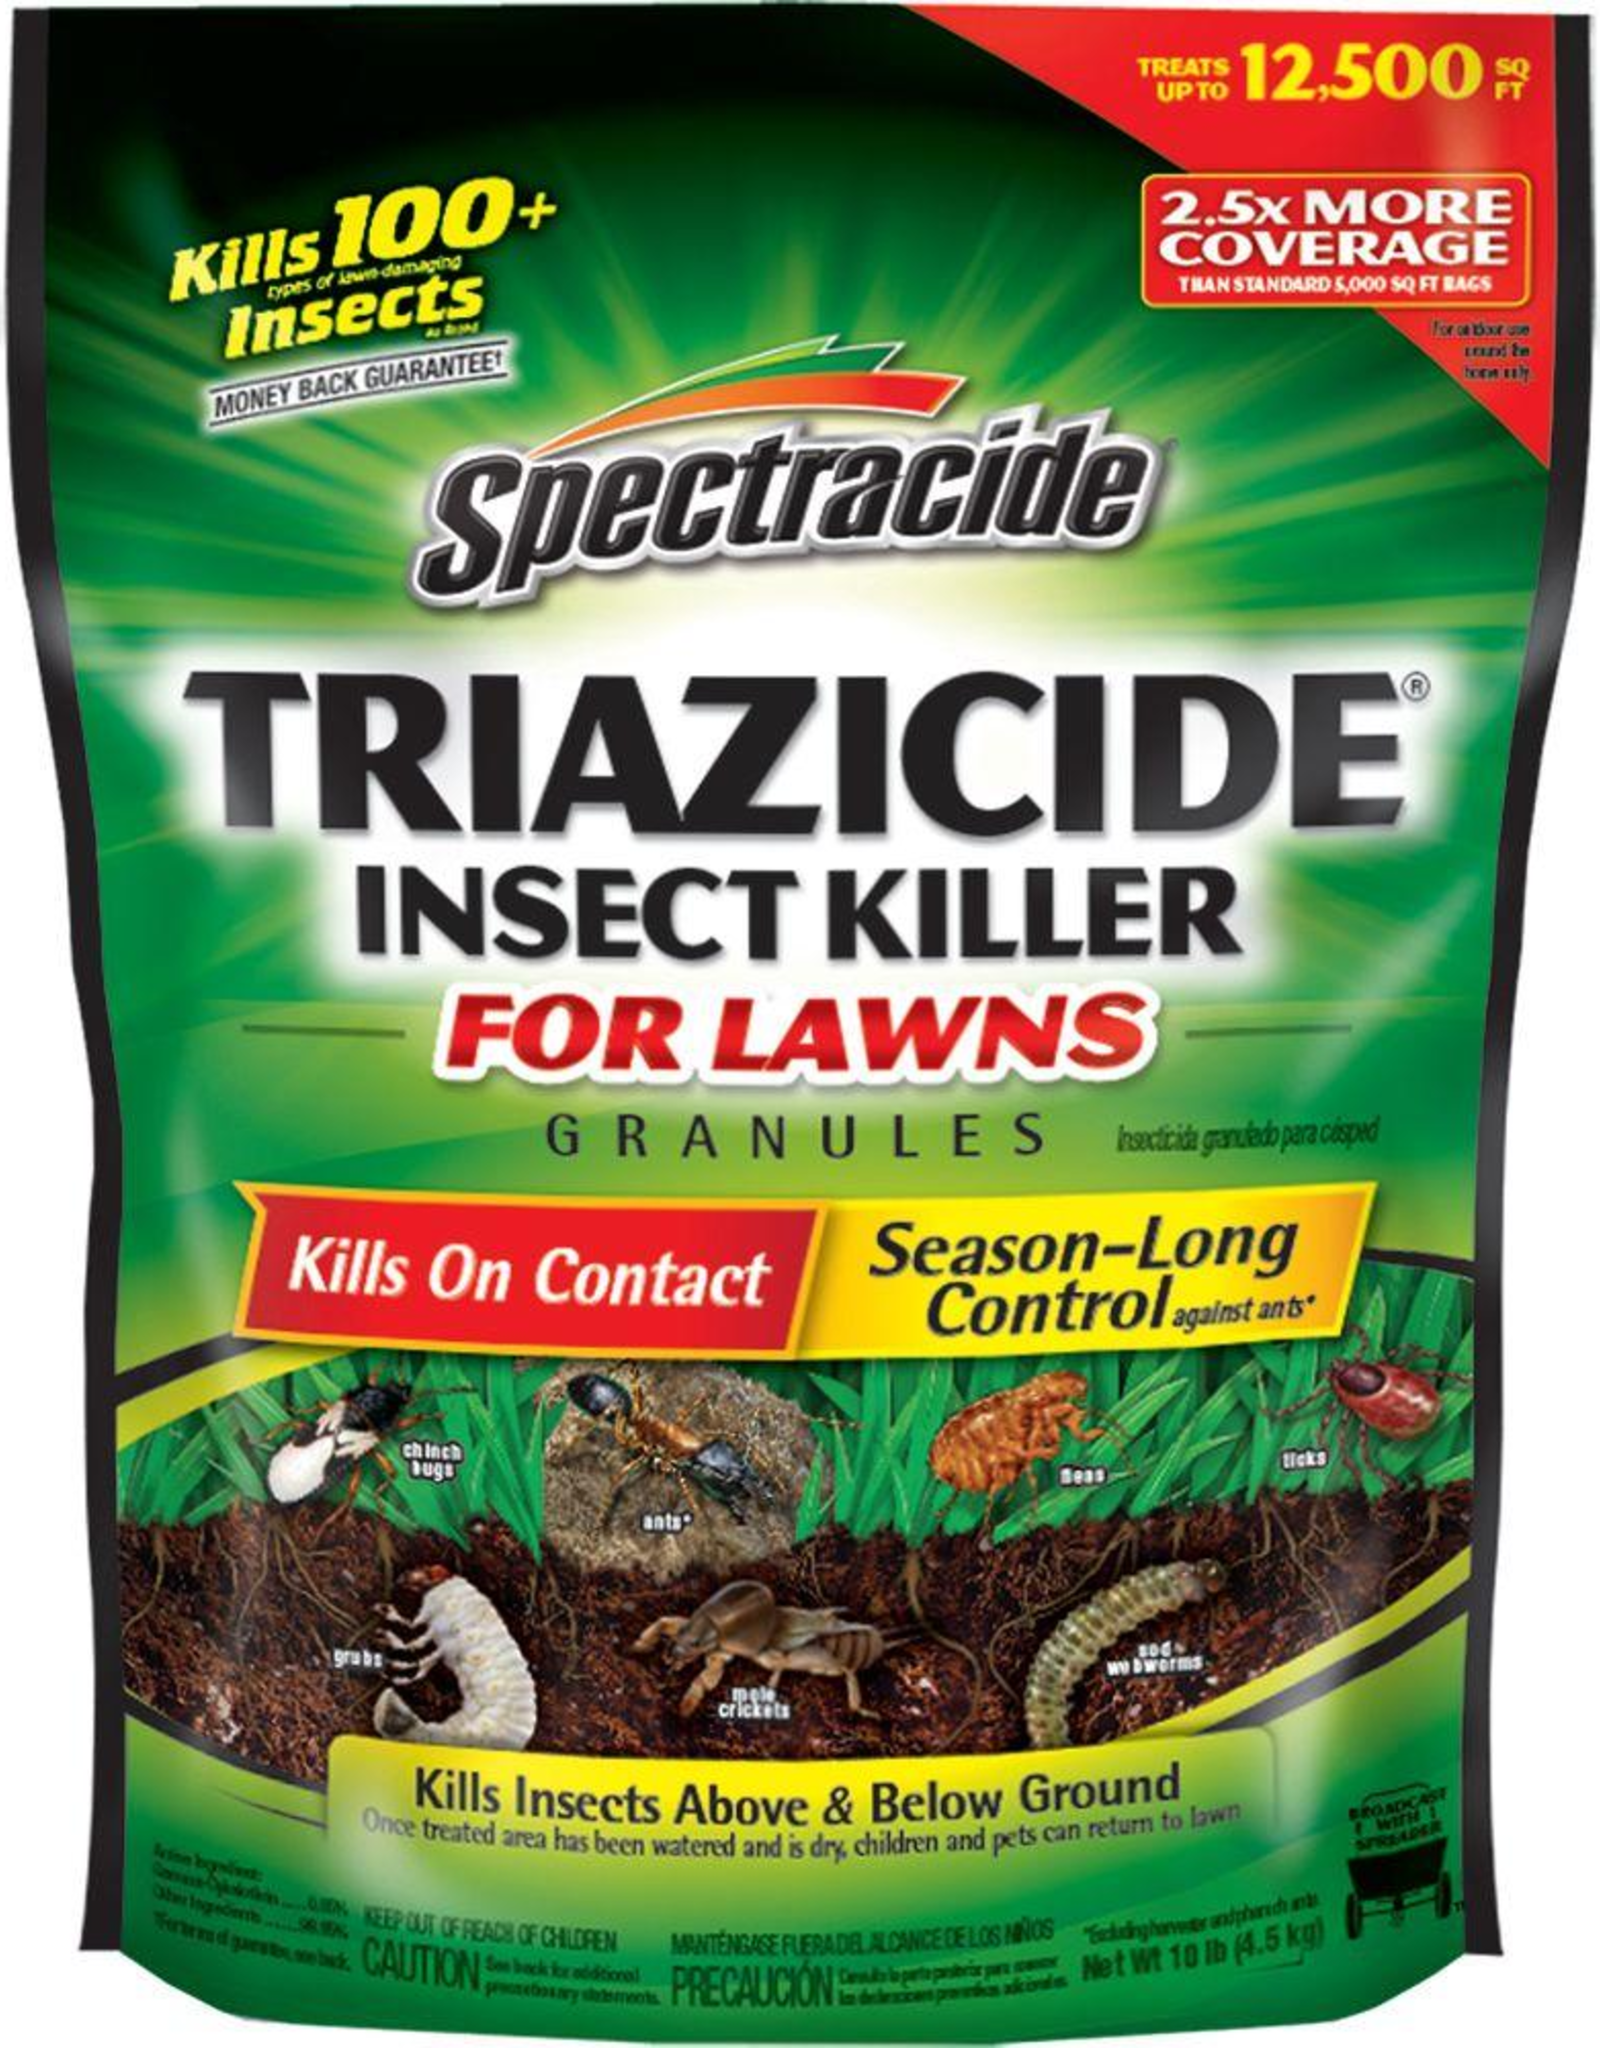 United Ind. Corp/Spectrum Spectracide Triazicide Once & Done Insect Killer Granules - 10 lb